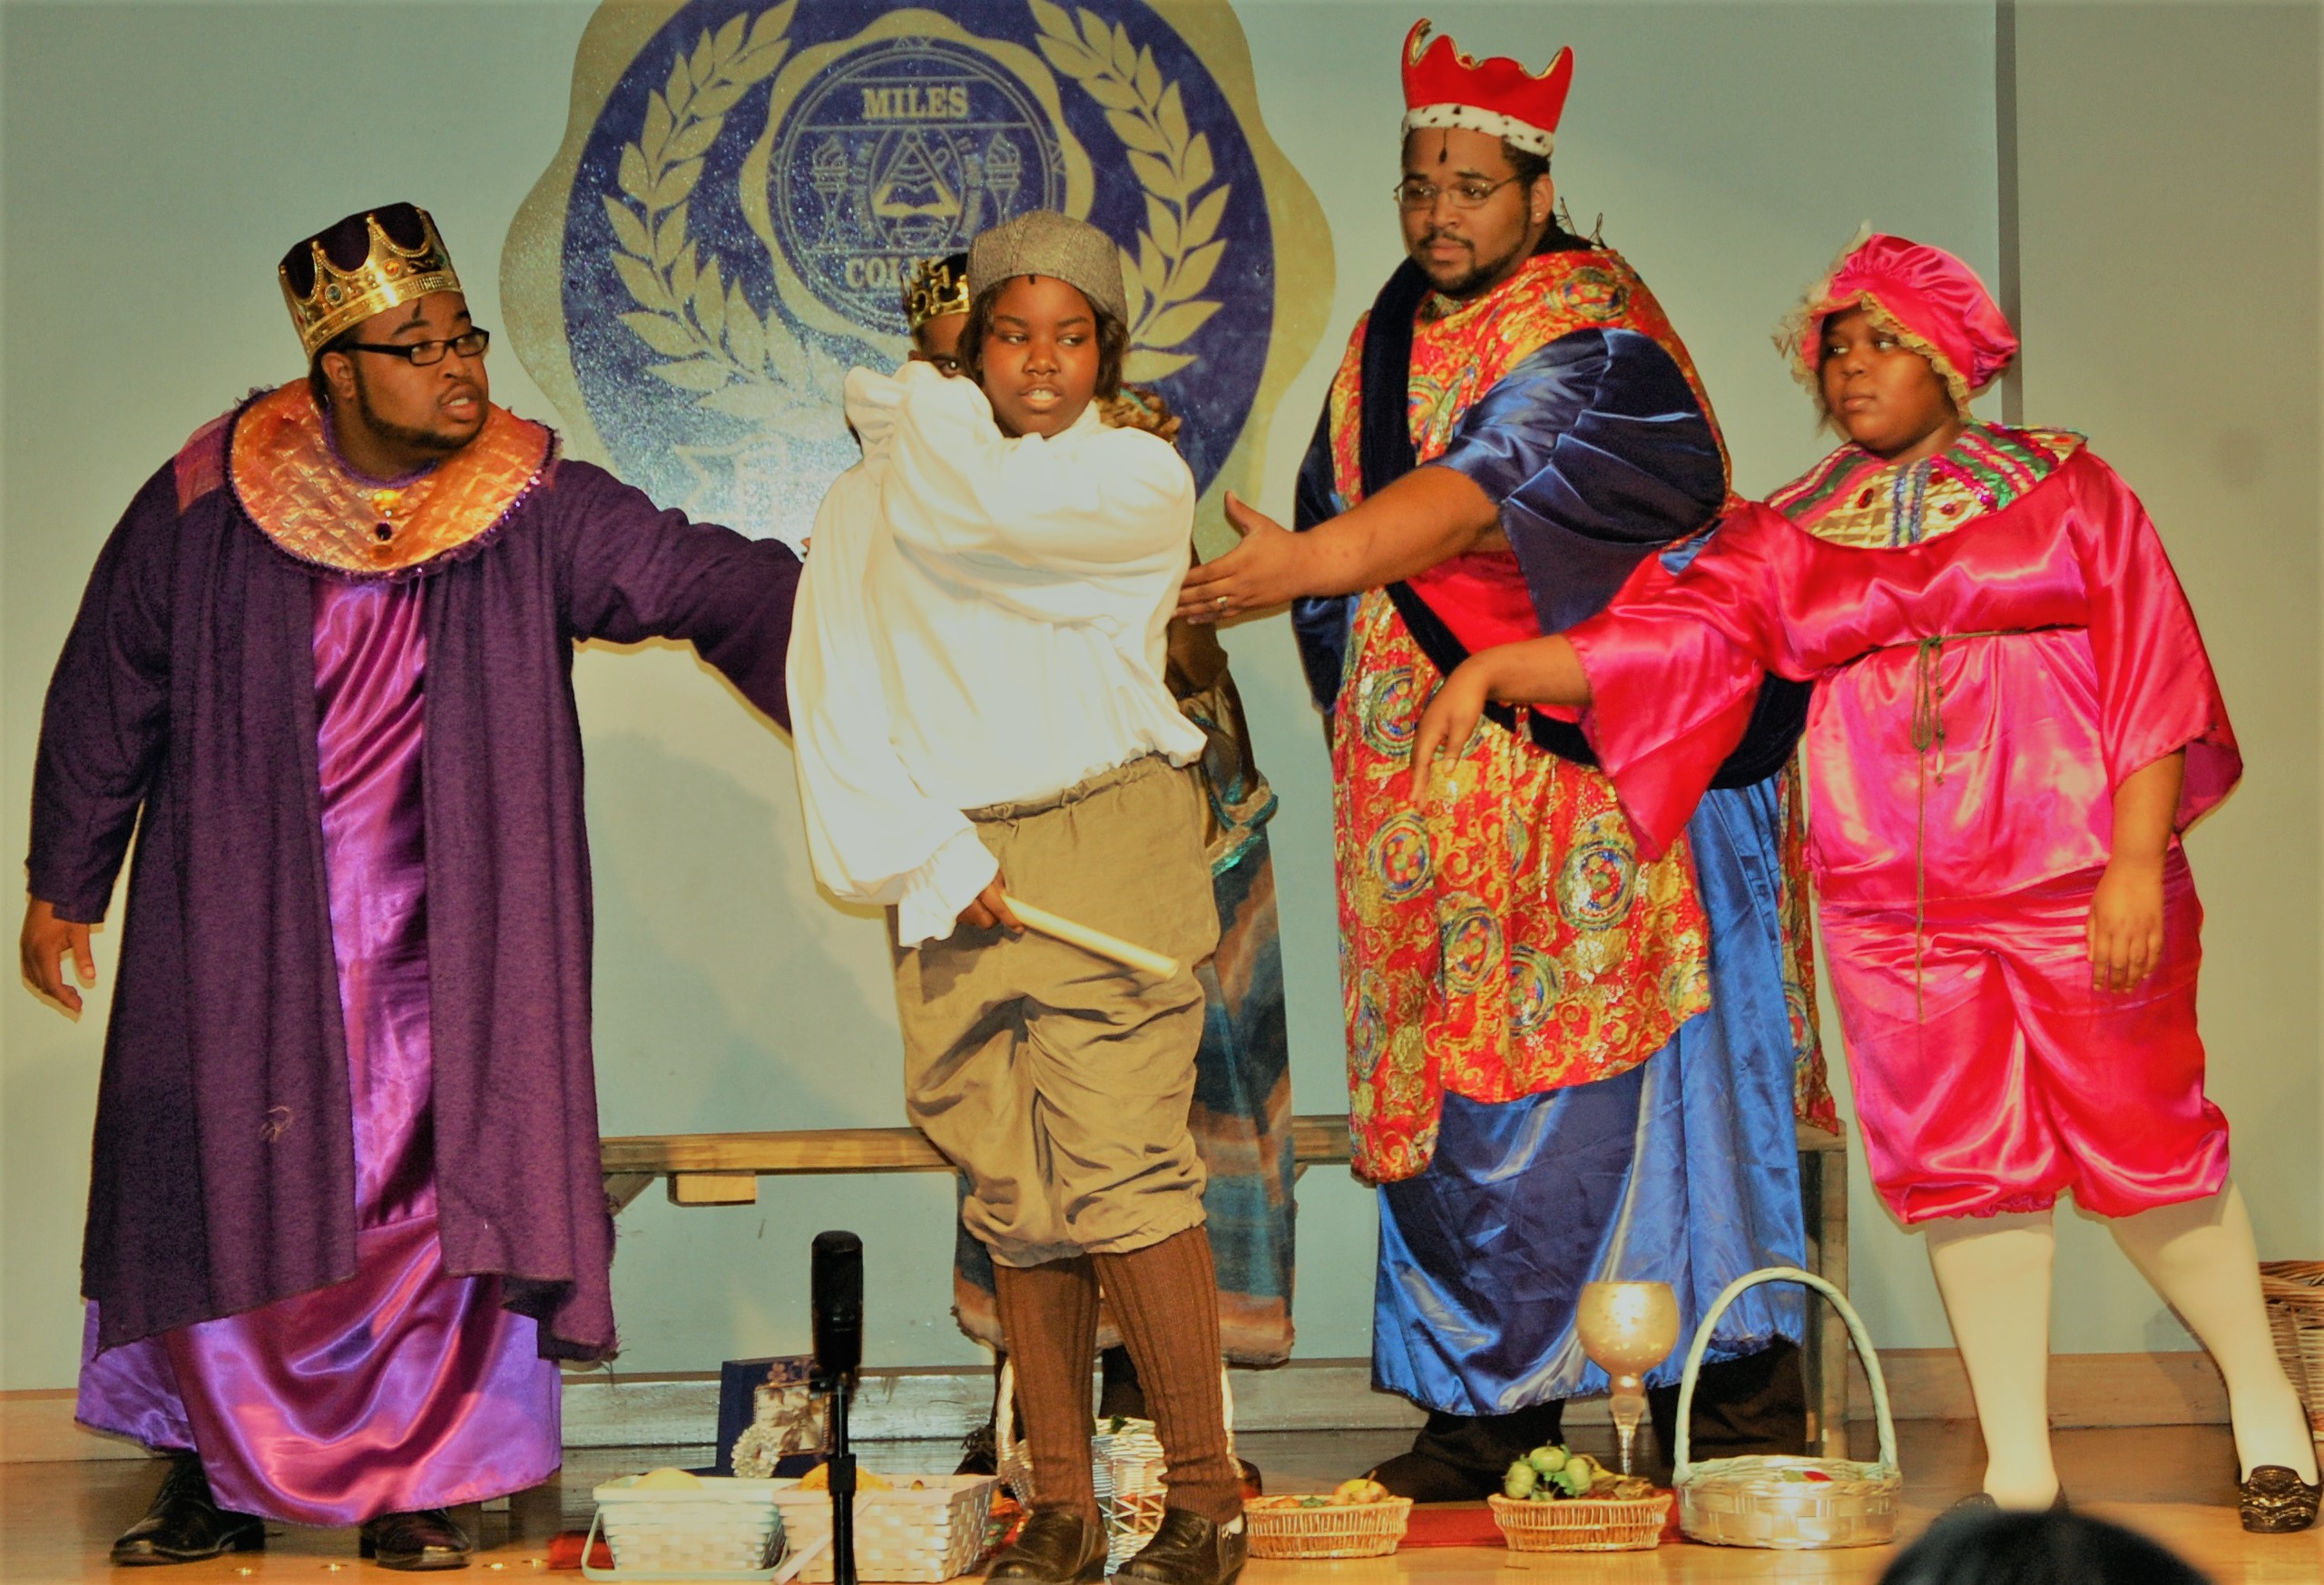 Diamond Sparks (second from left) performs in a production of Amahl and the Night Visitors at Miles College. The multitalented Alabama School of Fine Arts junior is set to sing in an Honors Performance Choir in July in Sydney, Australia.